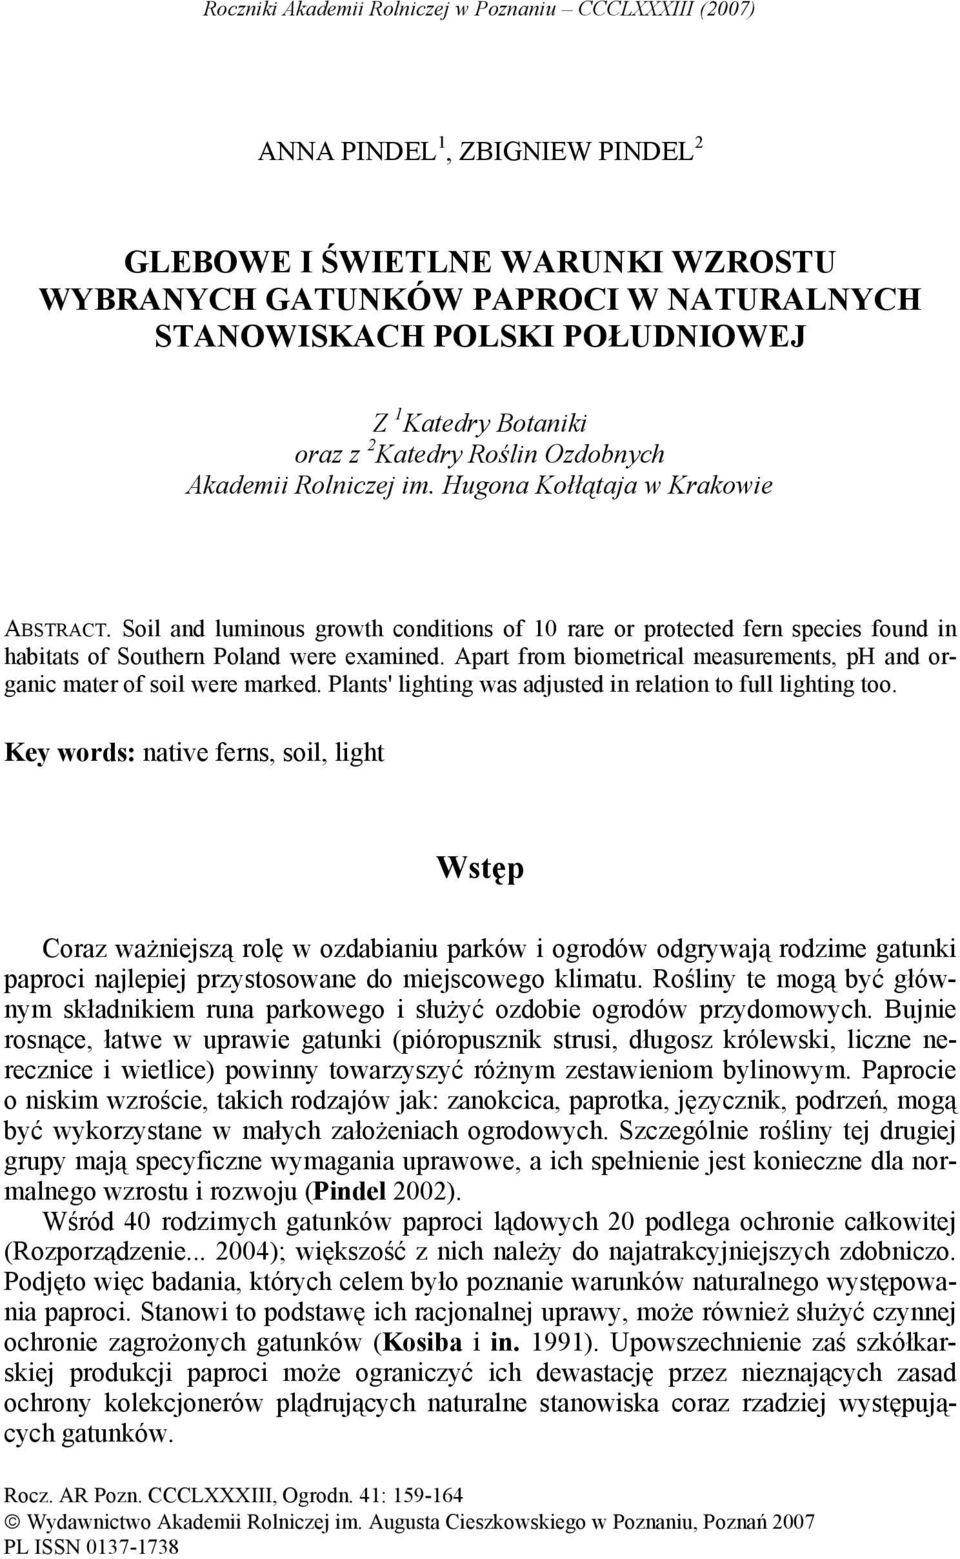 Soil and luminous growth conditions of 10 rare or protected fern species found in habitats of Southern Poland were examined.